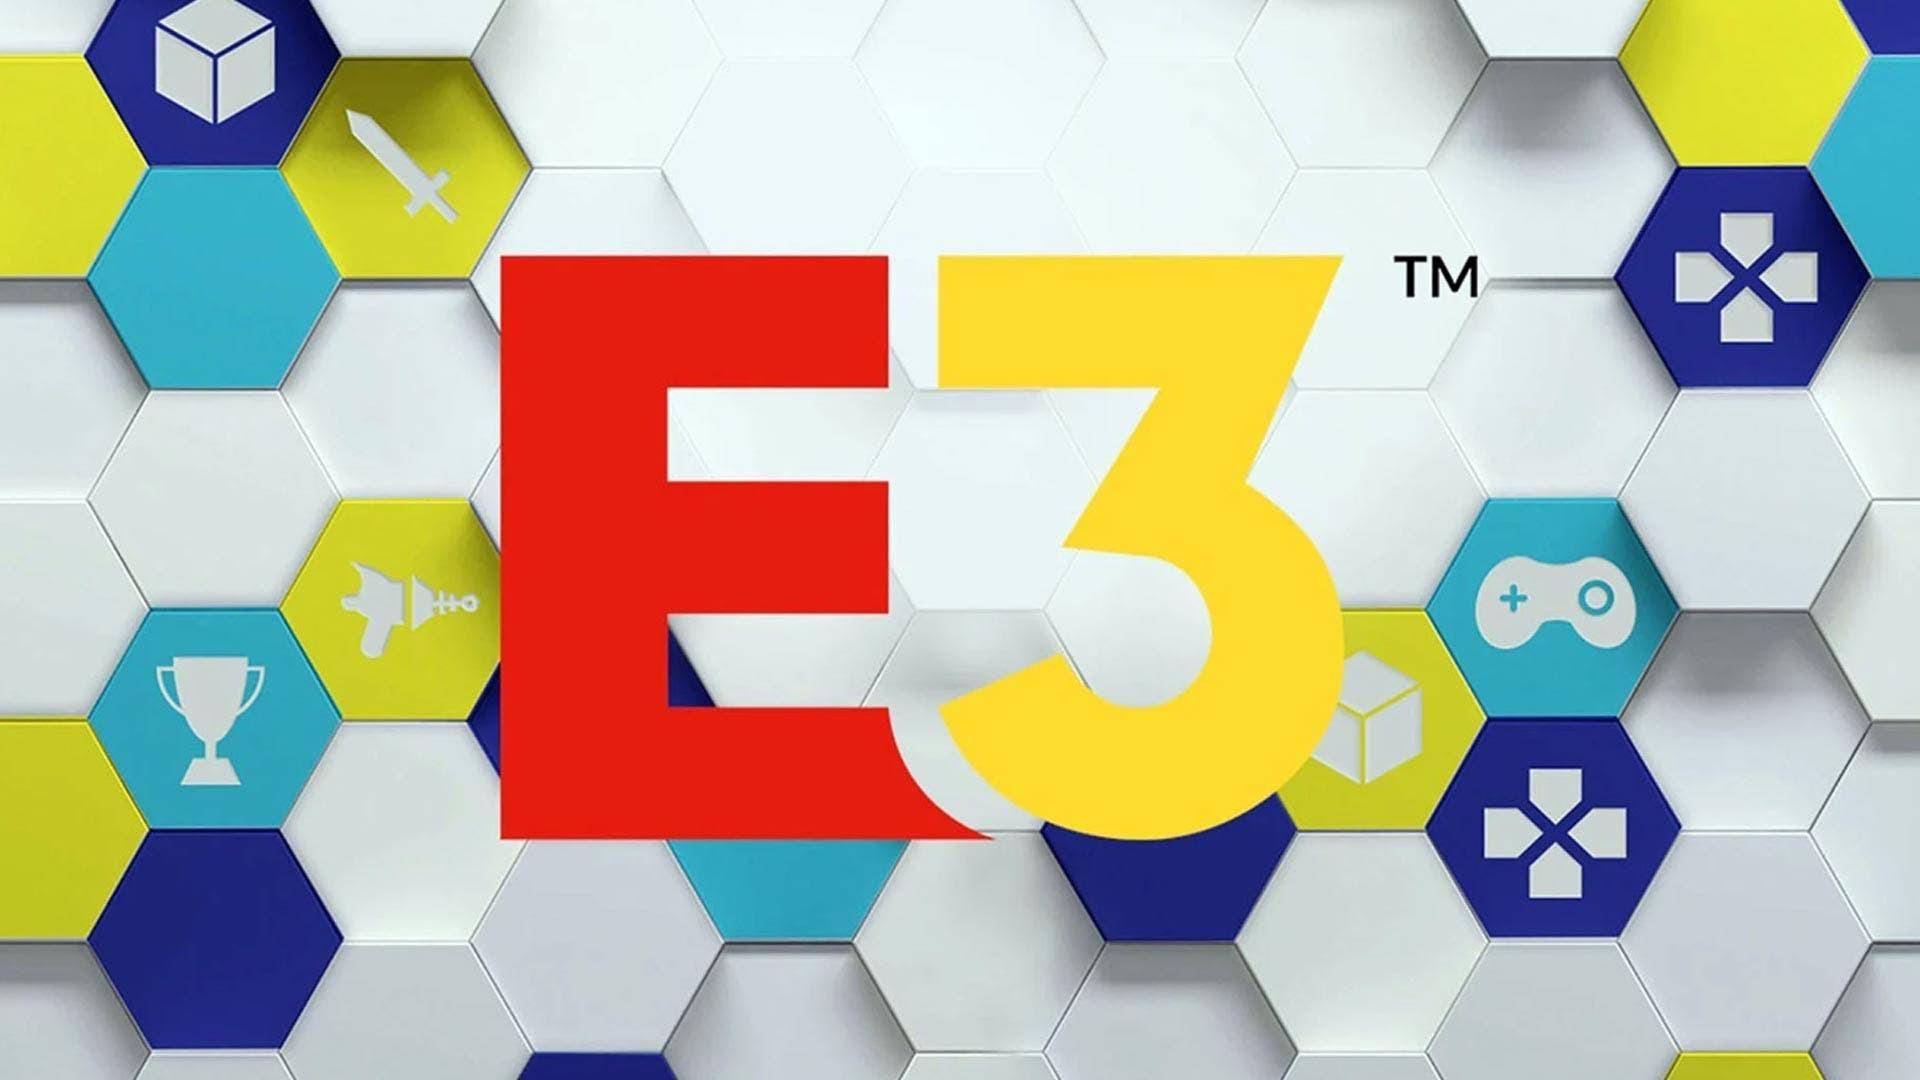 This is how E3 2021 will work